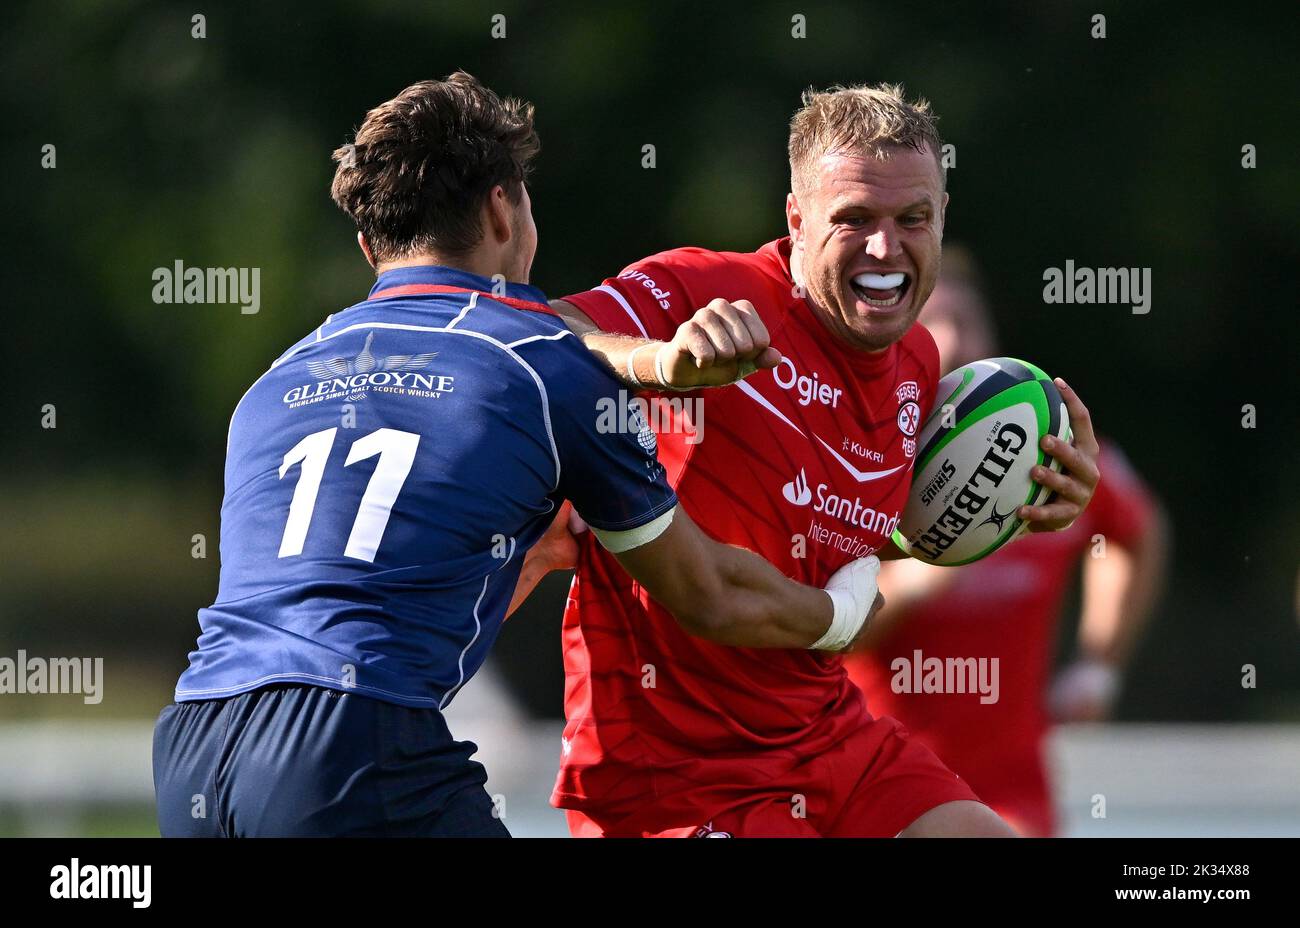 Richmond, United Kingdom. 24th Sep, 2022. Championship Rugby. London Scottish V Jersey Reds. The Richmond Athletic Ground. Richmond. Ben Woollett (Jersey Reds) tries to get past Josh Gillespie (London Scottish) during the London Scottish V Jersey Reds championship rugby match. Credit: Sport In Pictures/Alamy Live News Stock Photo